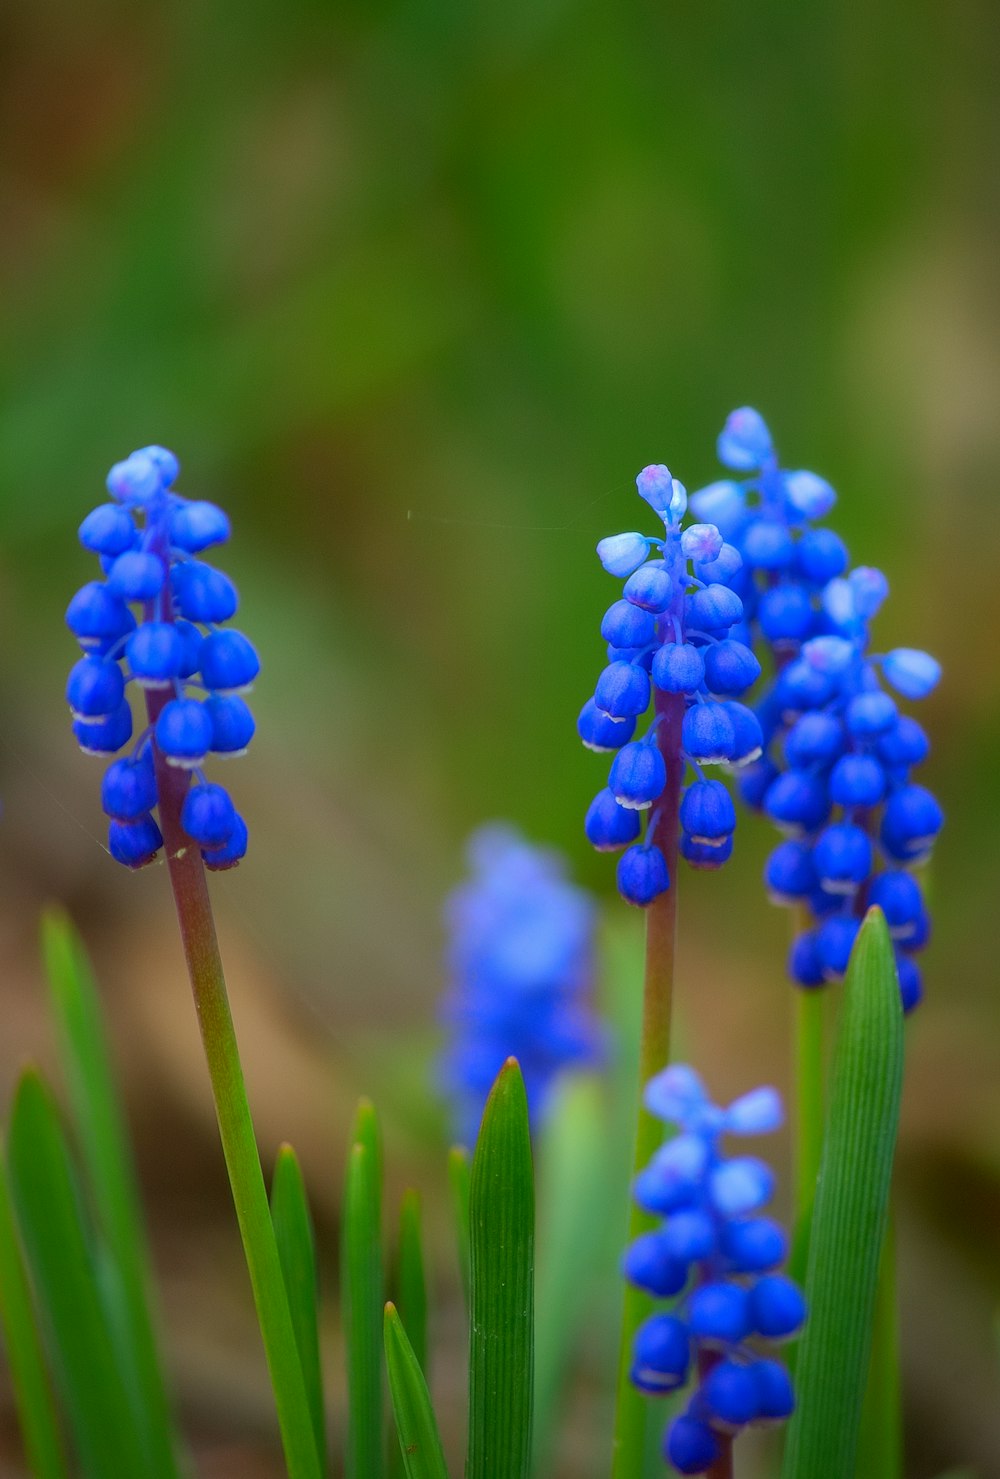 a group of blue flowers with green stems